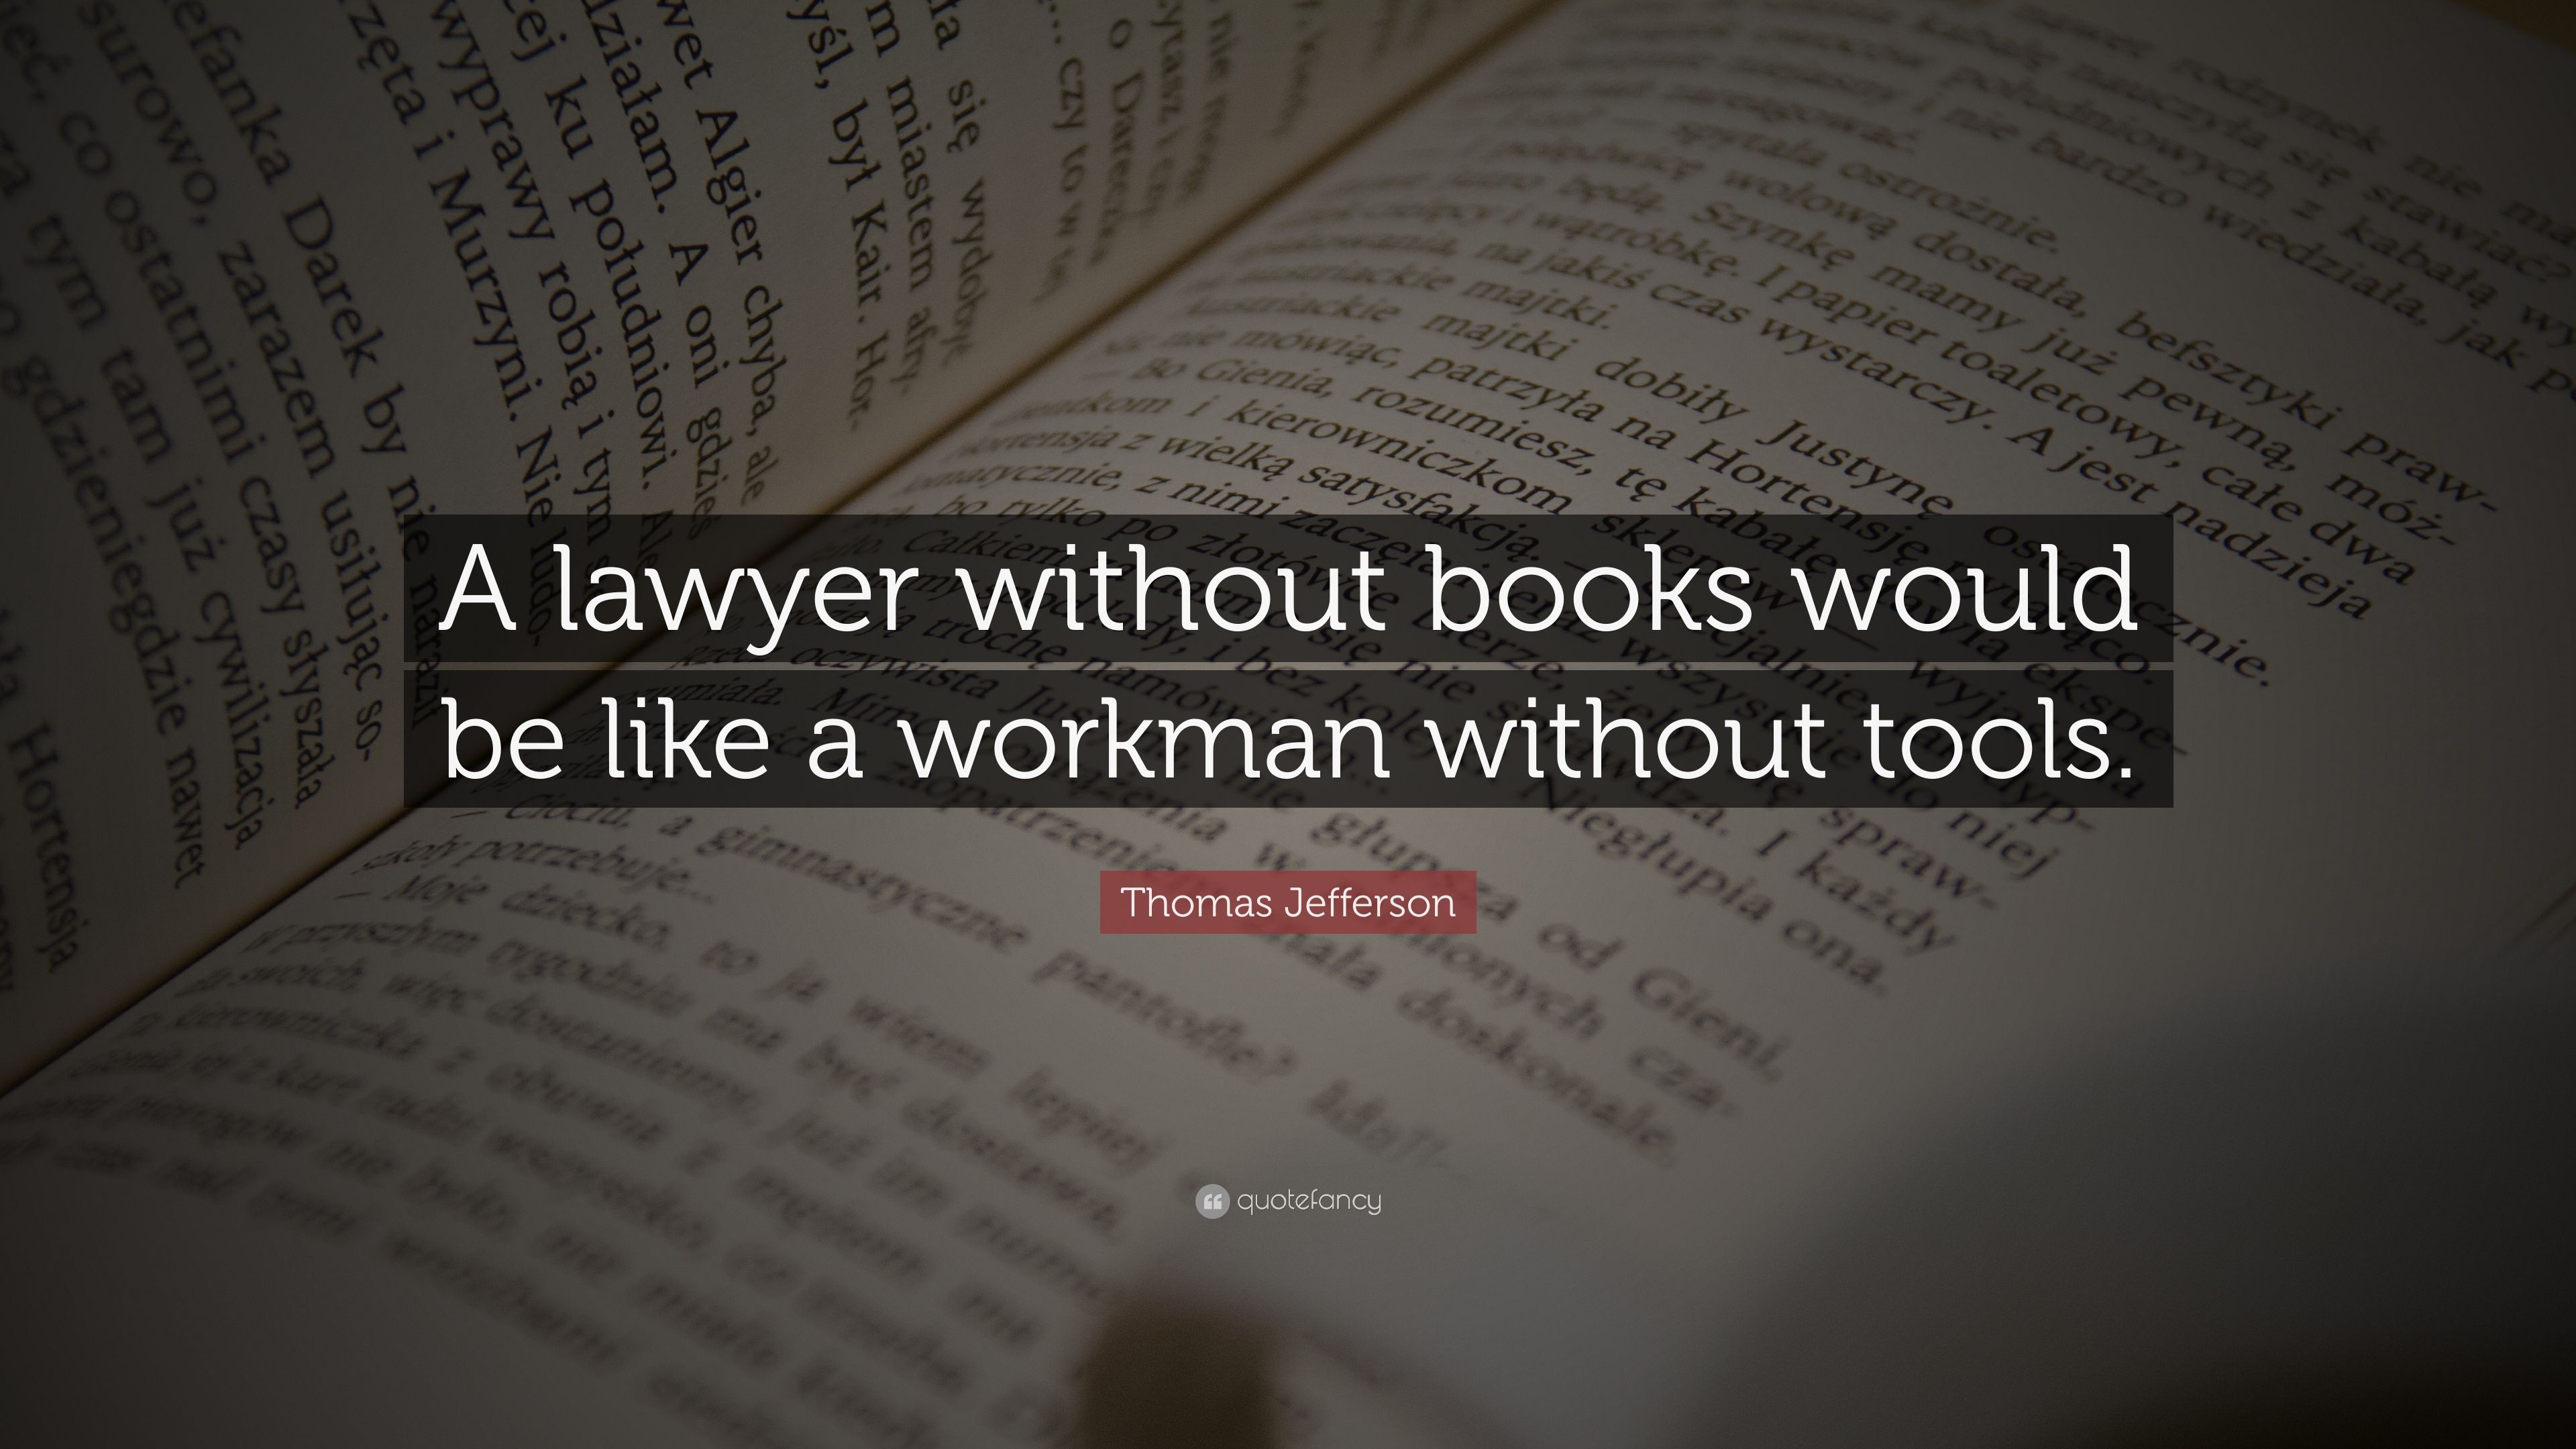 Thomas Jefferson Quote: “A lawyer without books would be like a workman without tools.” (12 wallpaper)